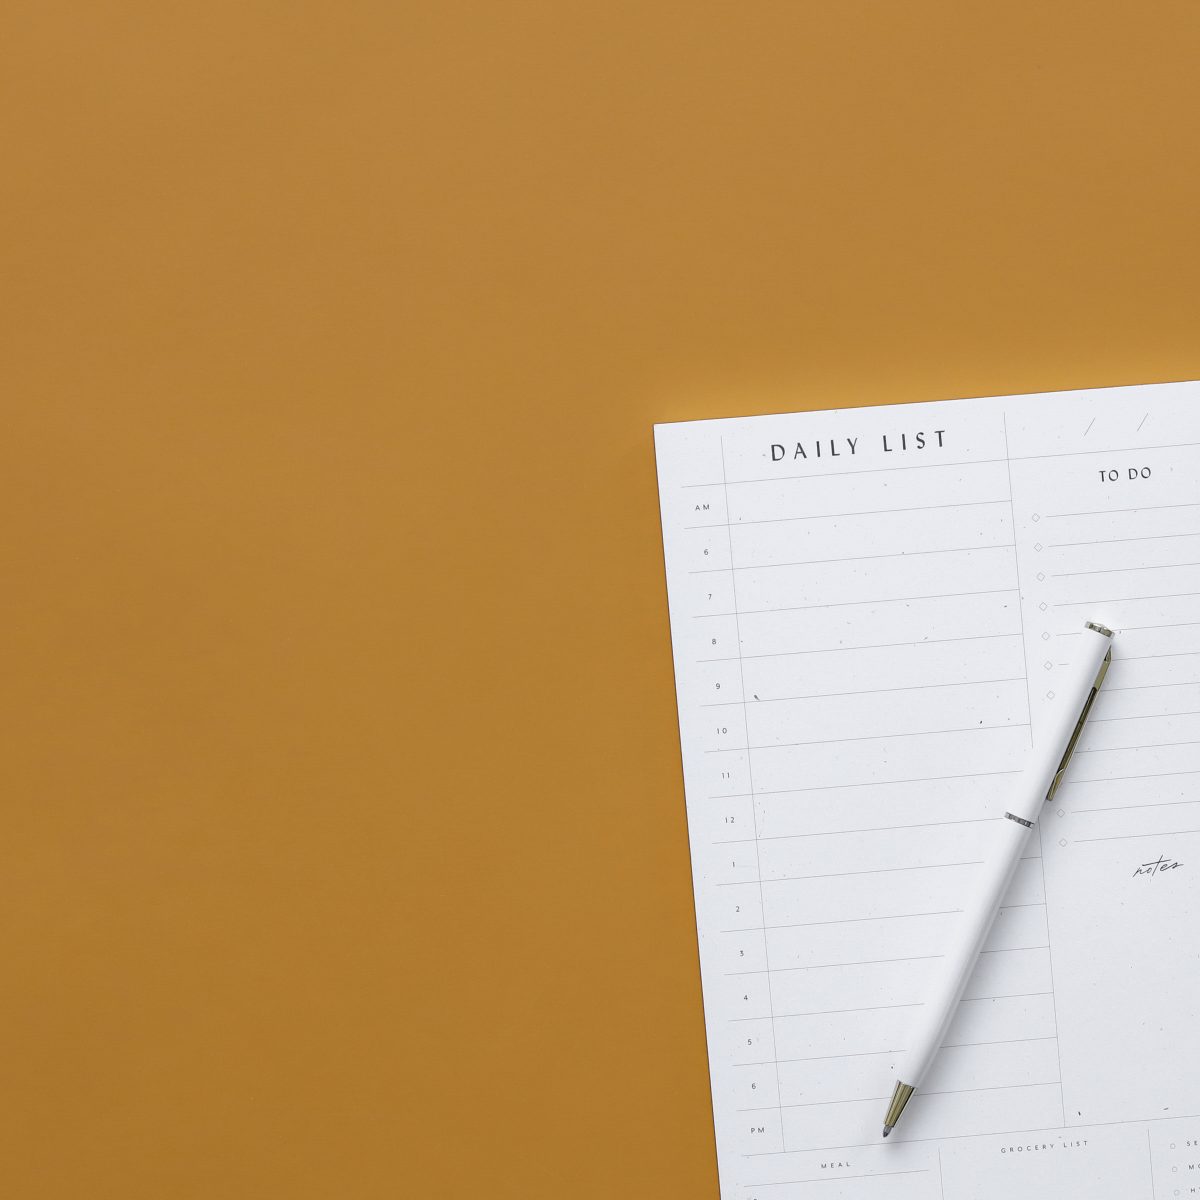 6 Genius Methods for Creating a Time-saving Blog Schedule